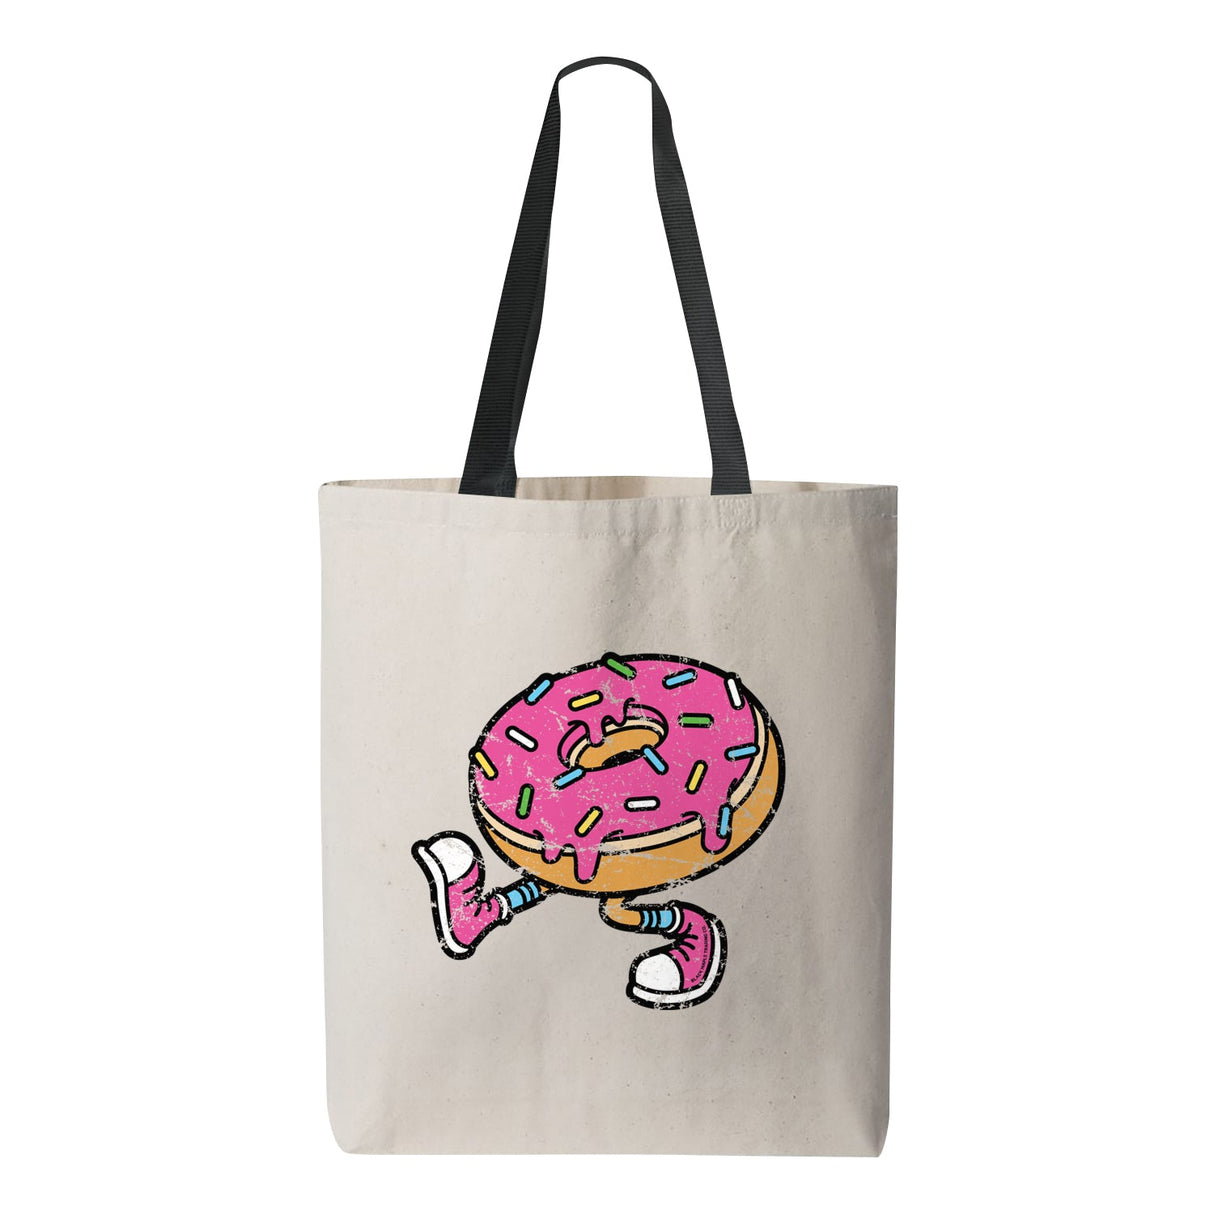 The Best Sprinkle Donut Tote Bag Natural with Black